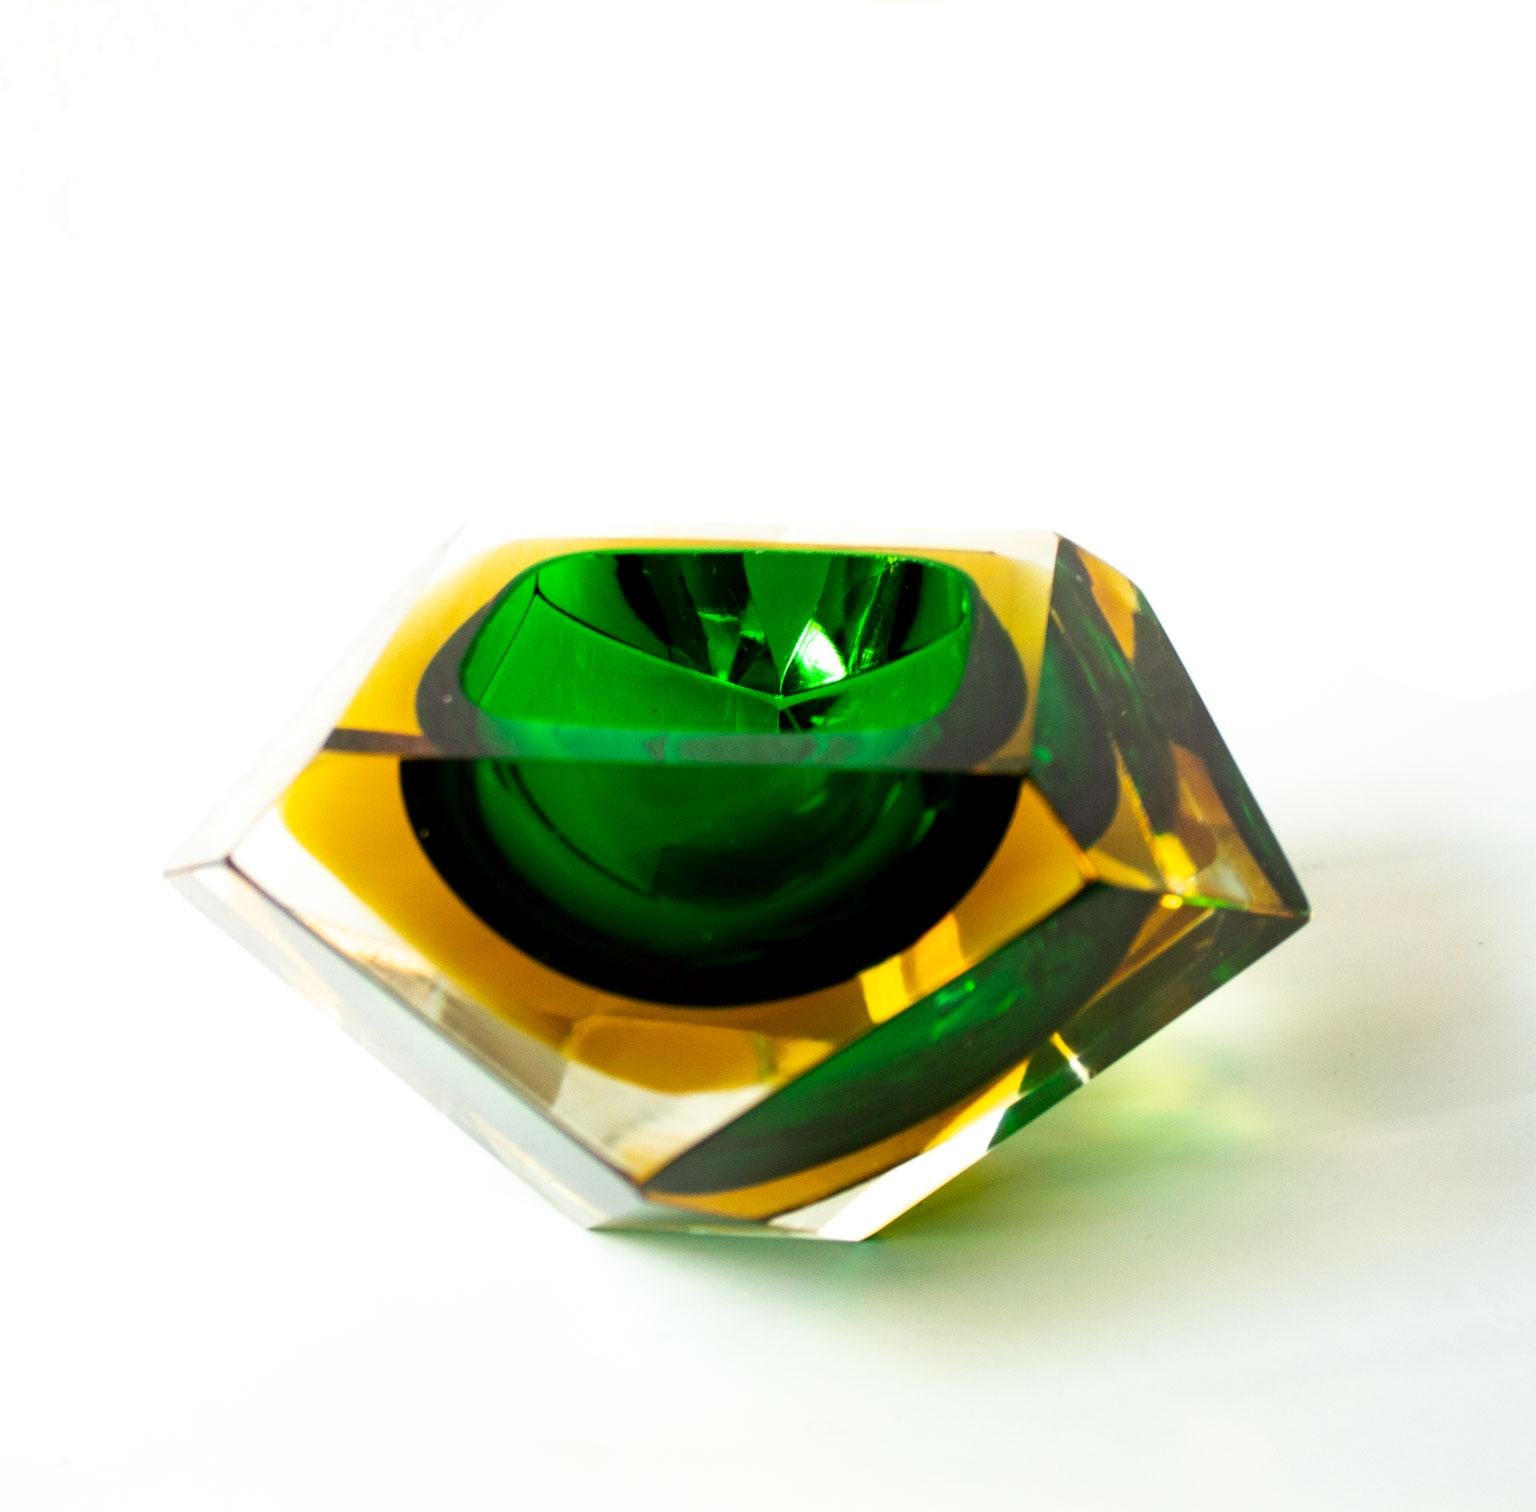 Italian Mid-Century Modern green and yellow Sommerso Murano glass bowl attributed to Flavio Poli. 
Designed in a diamond shaped 12 faceted sides in hues of yellow and green. Cool deco item that can be used as a serve ware, ashtray or jewelry bowl.